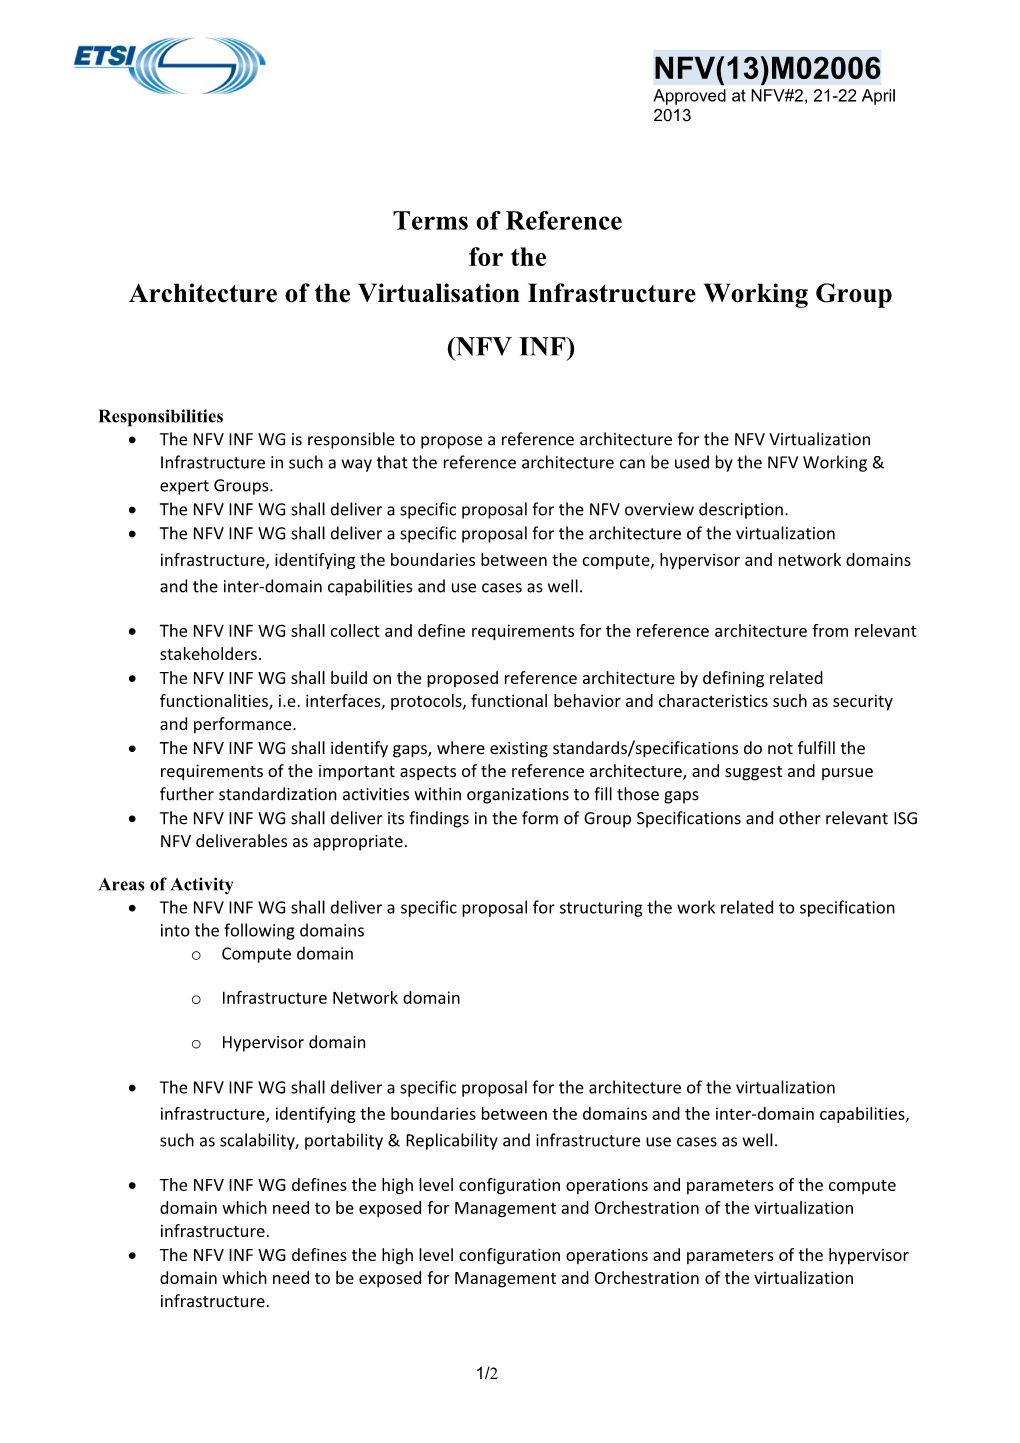 Terms of Reference for the Architecture of the Virtualisation Infrastructure Working Group